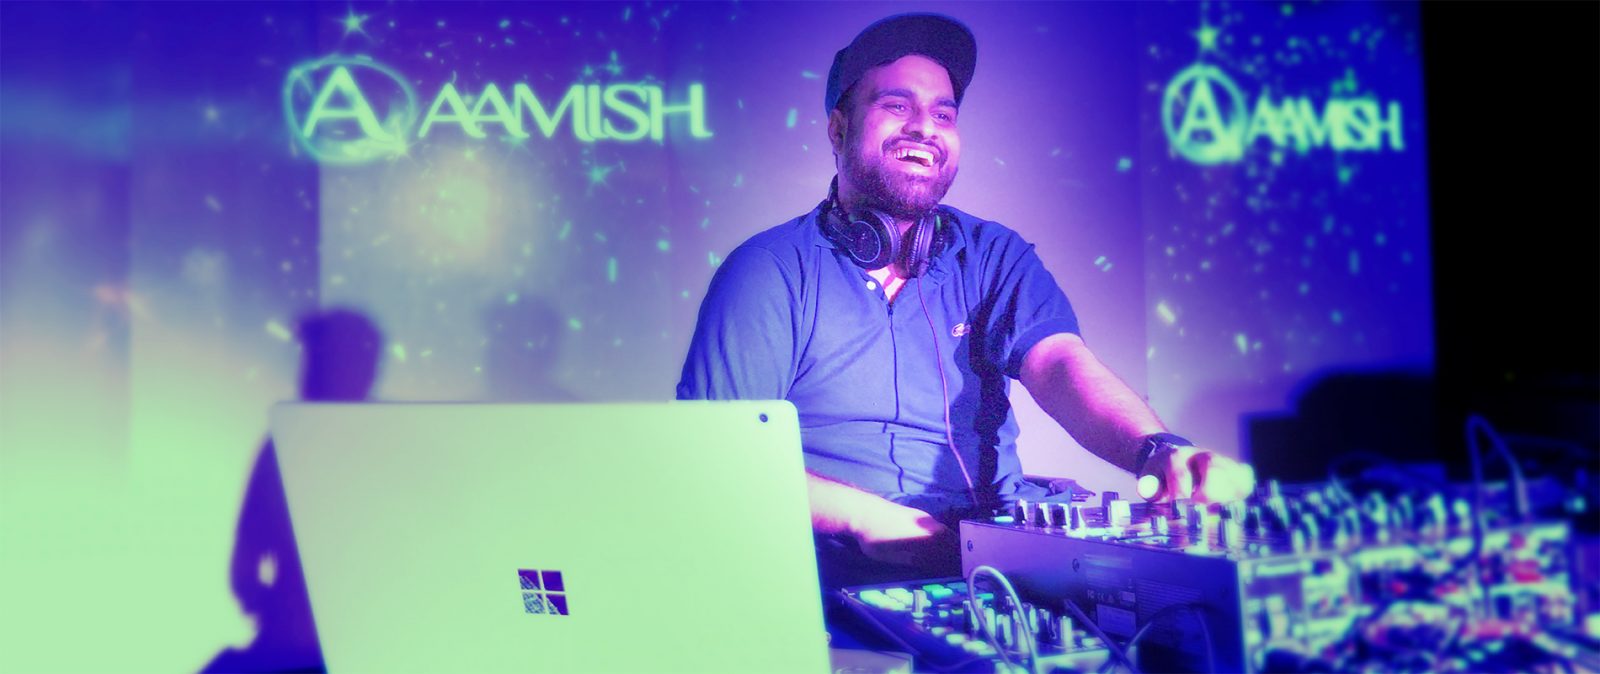 DJ Aamish playing on the console along with the Microsoft Surface Book 2